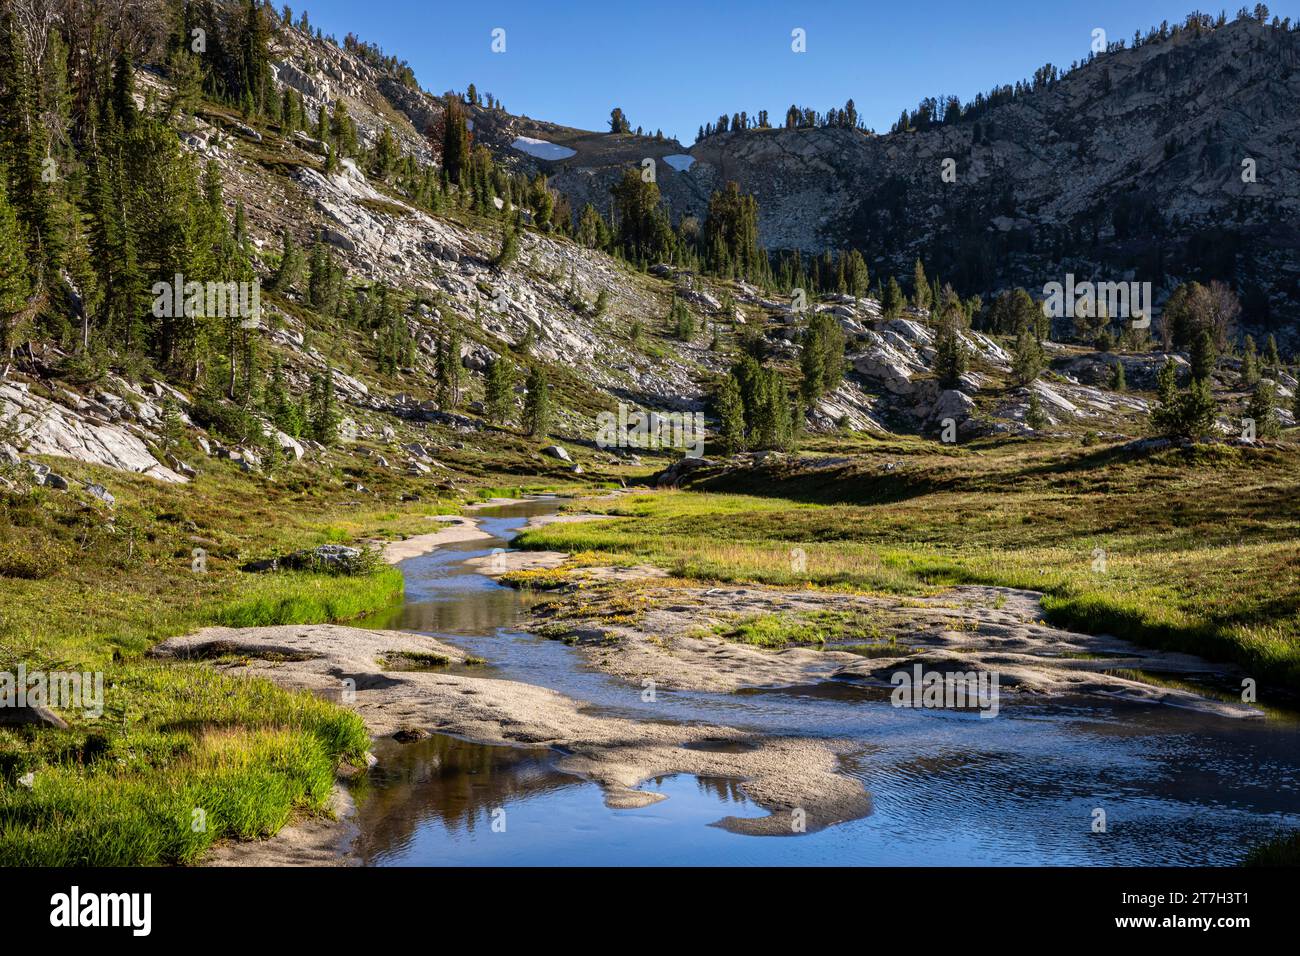 OR02746-00...OREGON - Elkhorn Creek located along the Copper Creek Trail in the Eagle Cap Wilderness area. Stock Photo